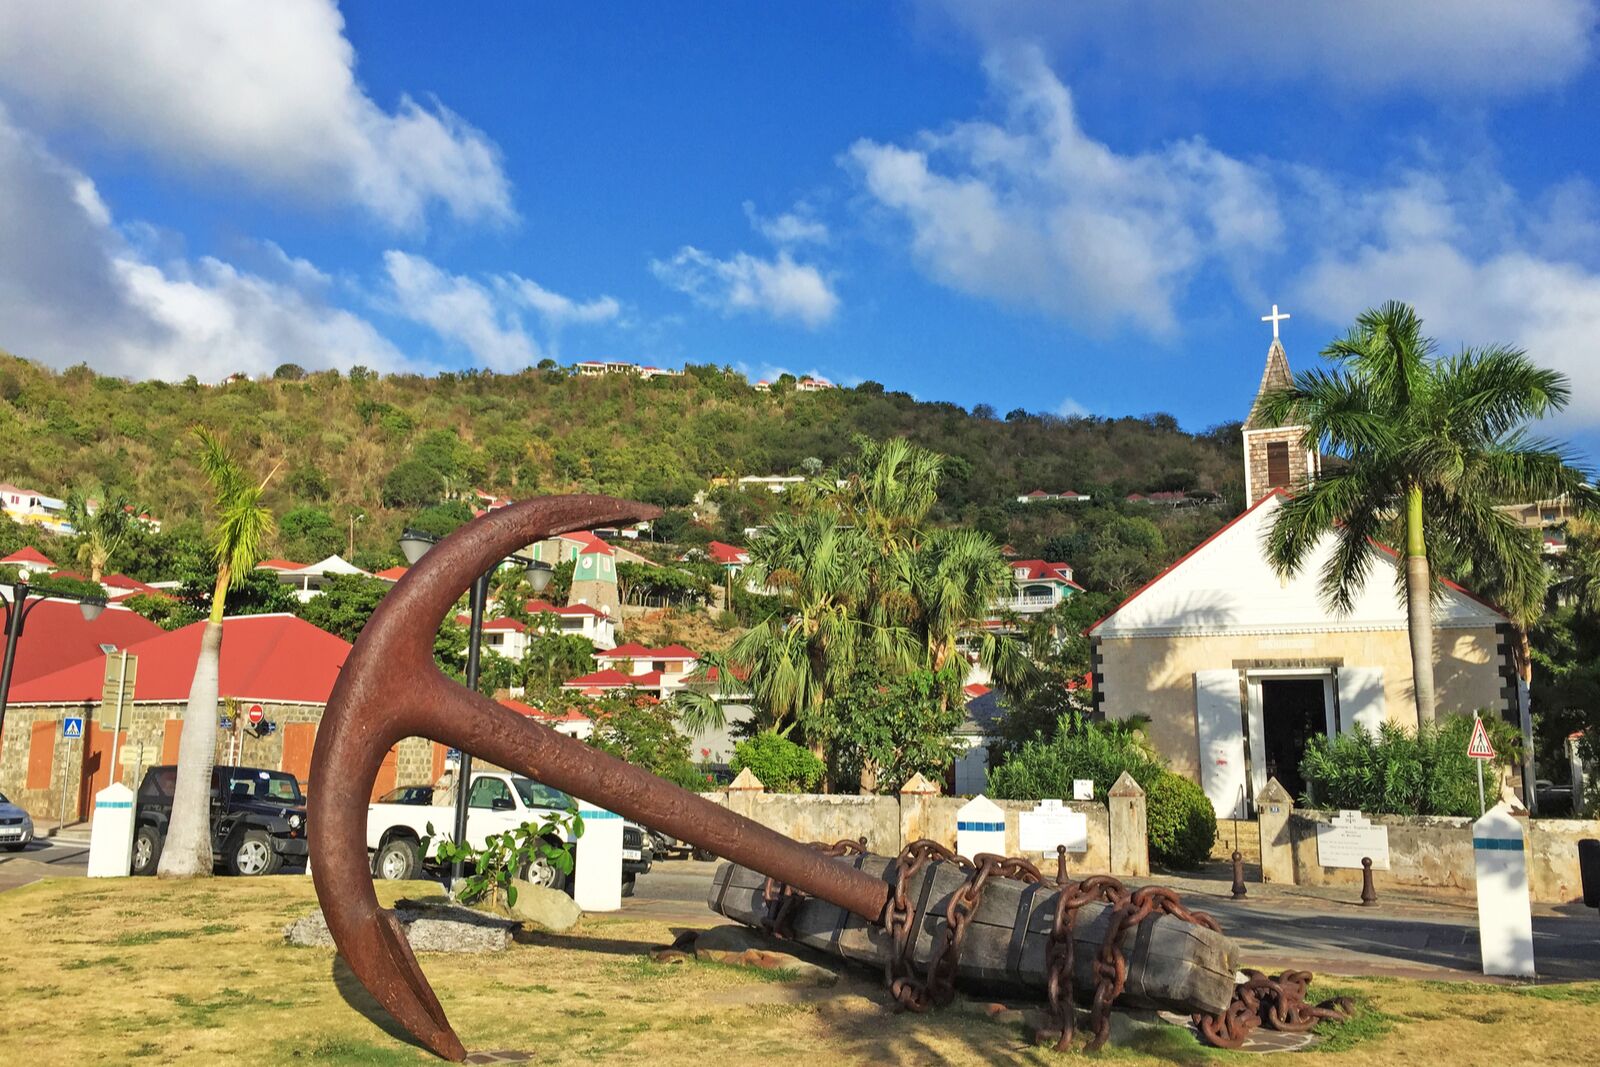 large, rusted anchor in front of a church